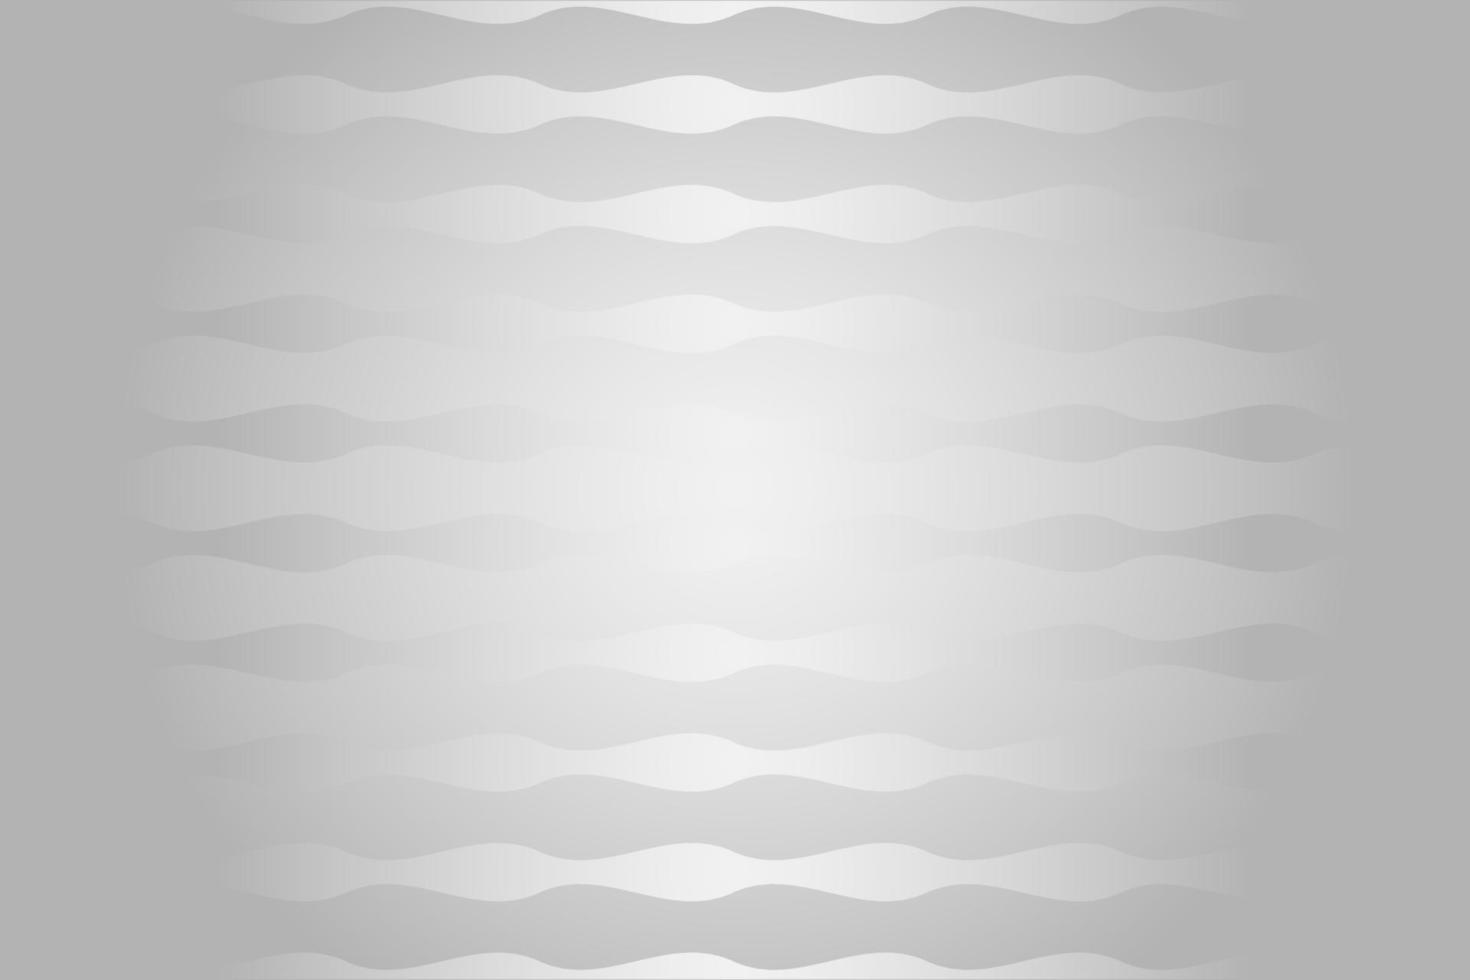 White and gray background texture with modern design vector